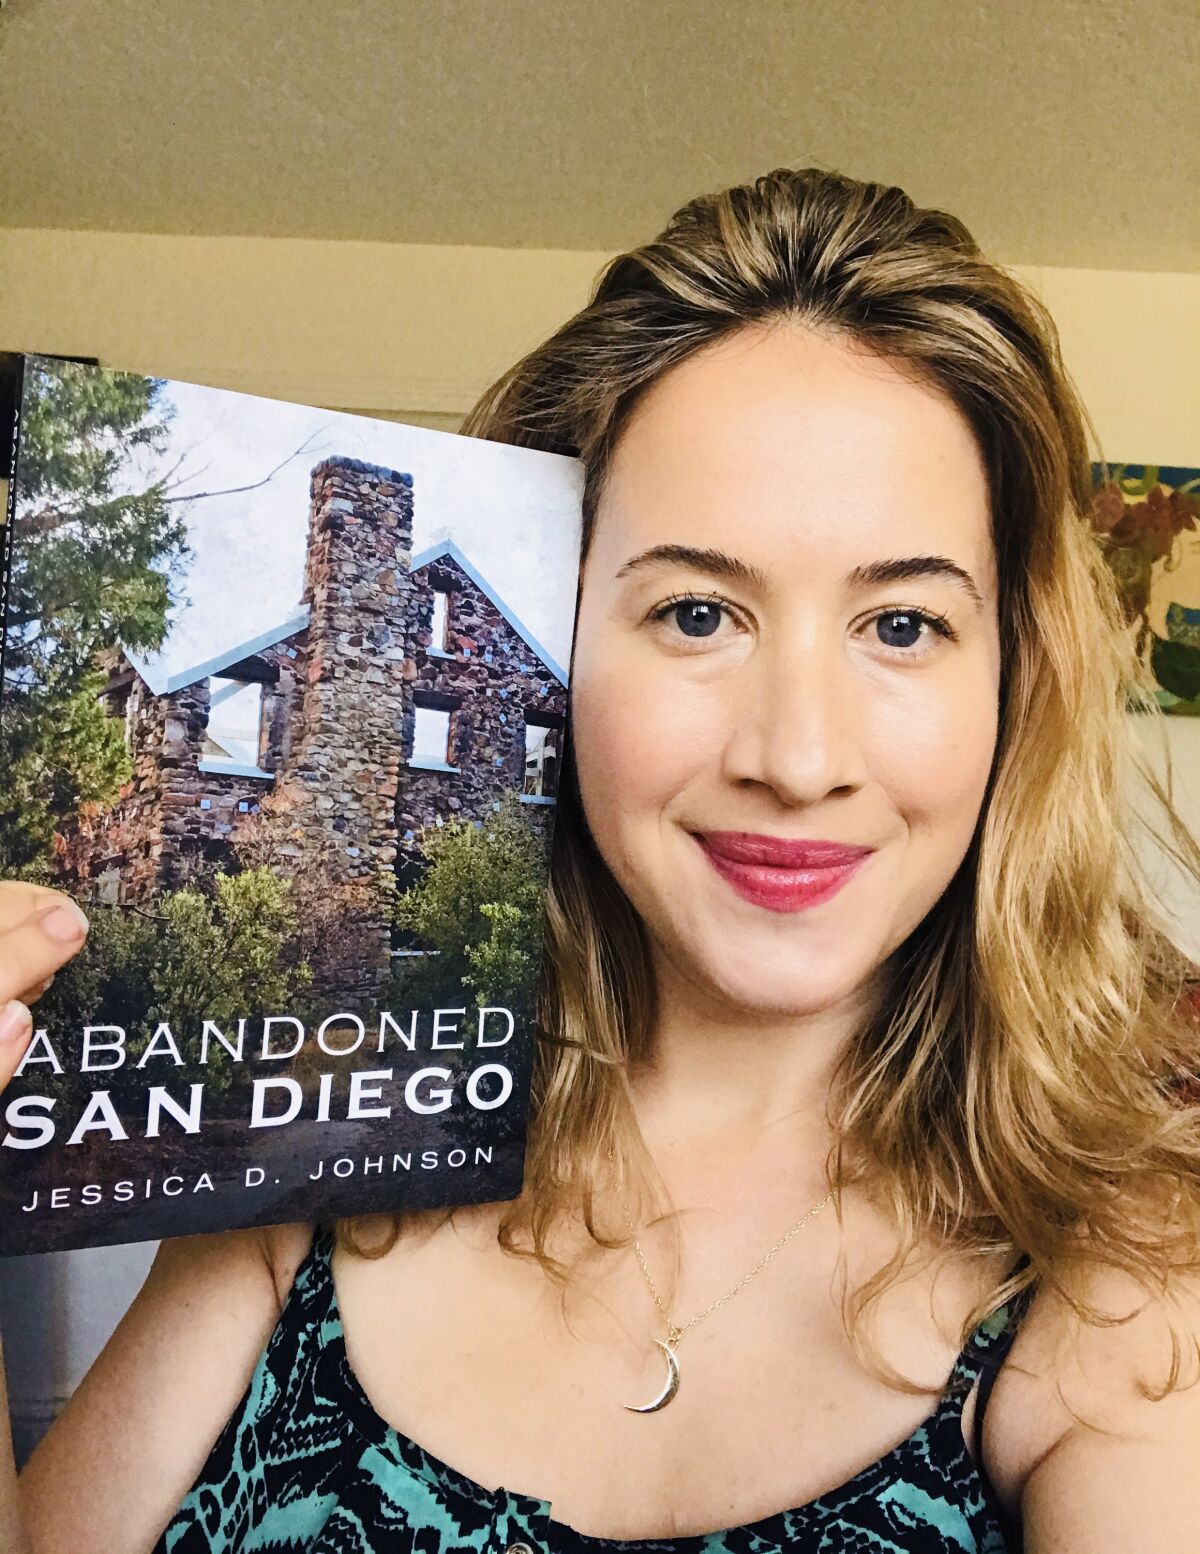 Author Jessica Johnson with her book “Abandoned San Diego”